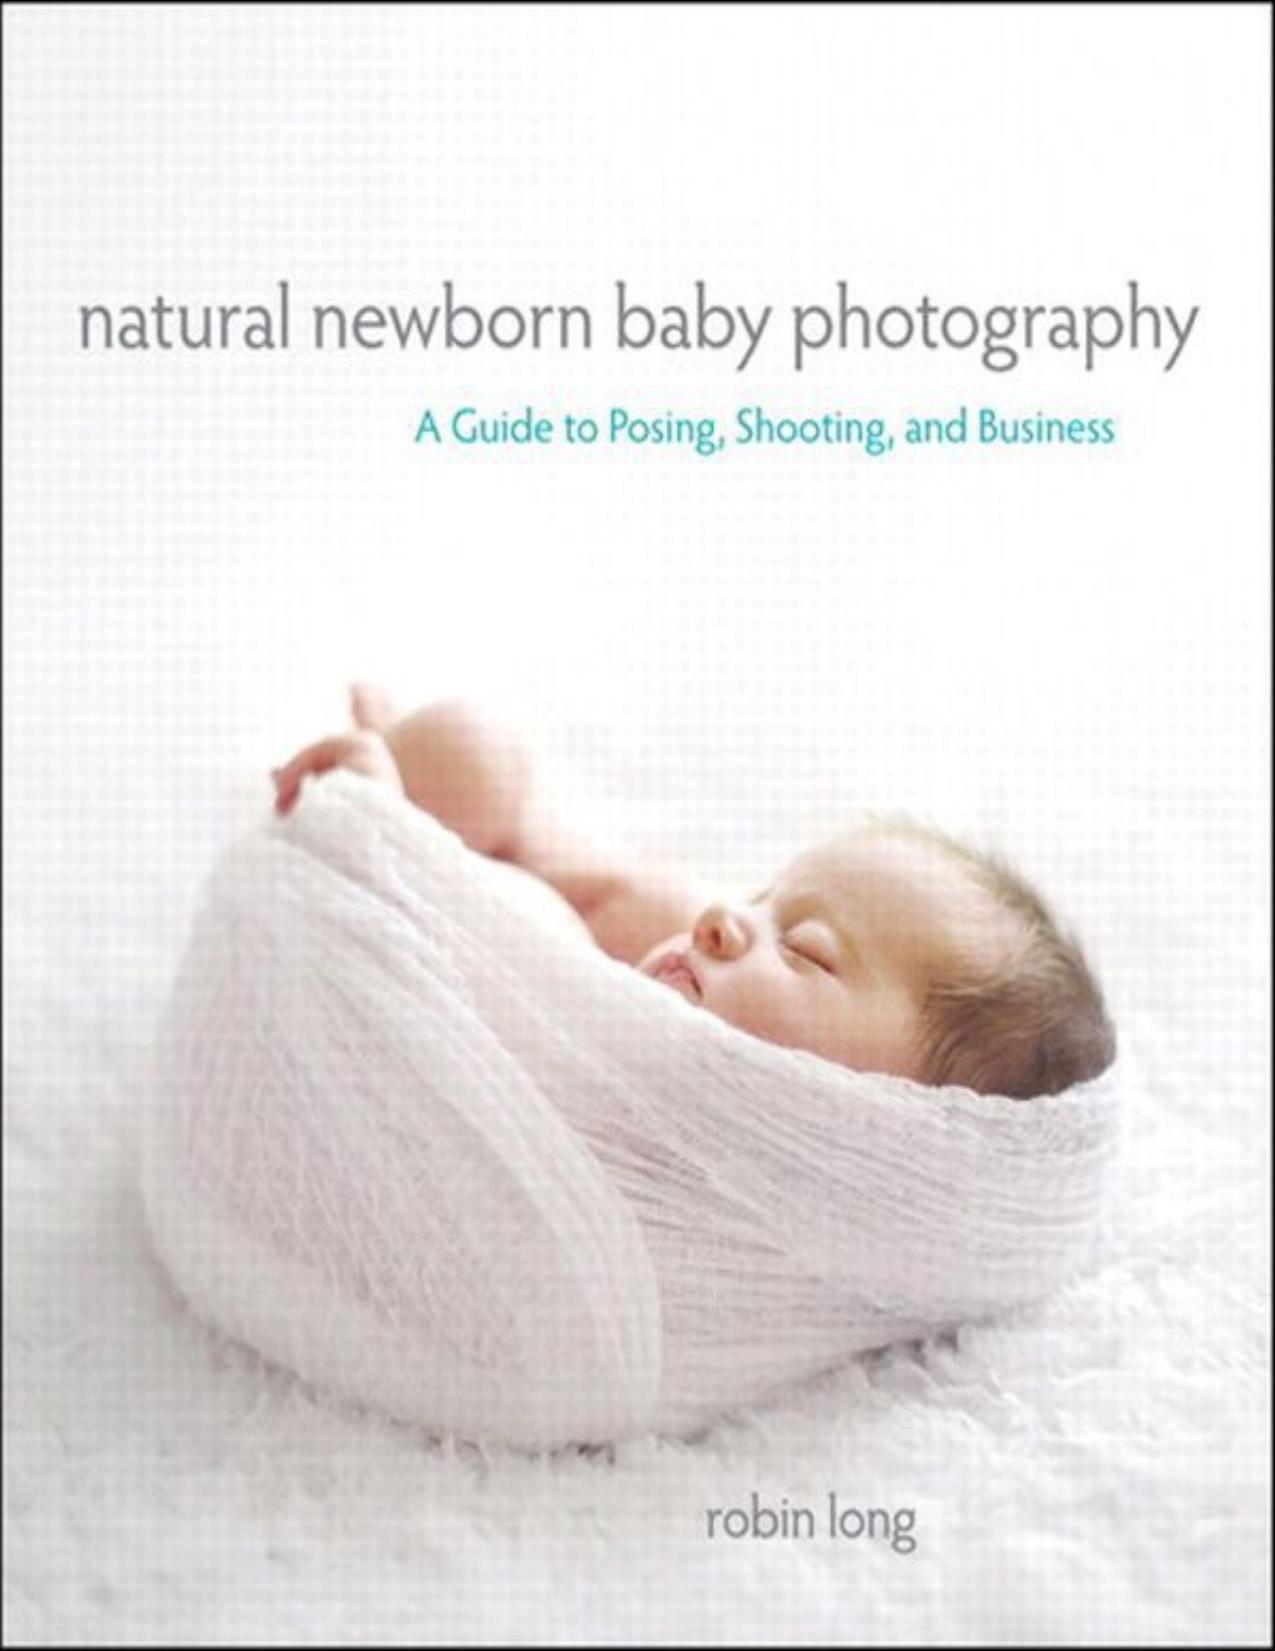 Natural Newborn Baby Photography: A Guide to Posing, Shooting, and Business by Long Robin